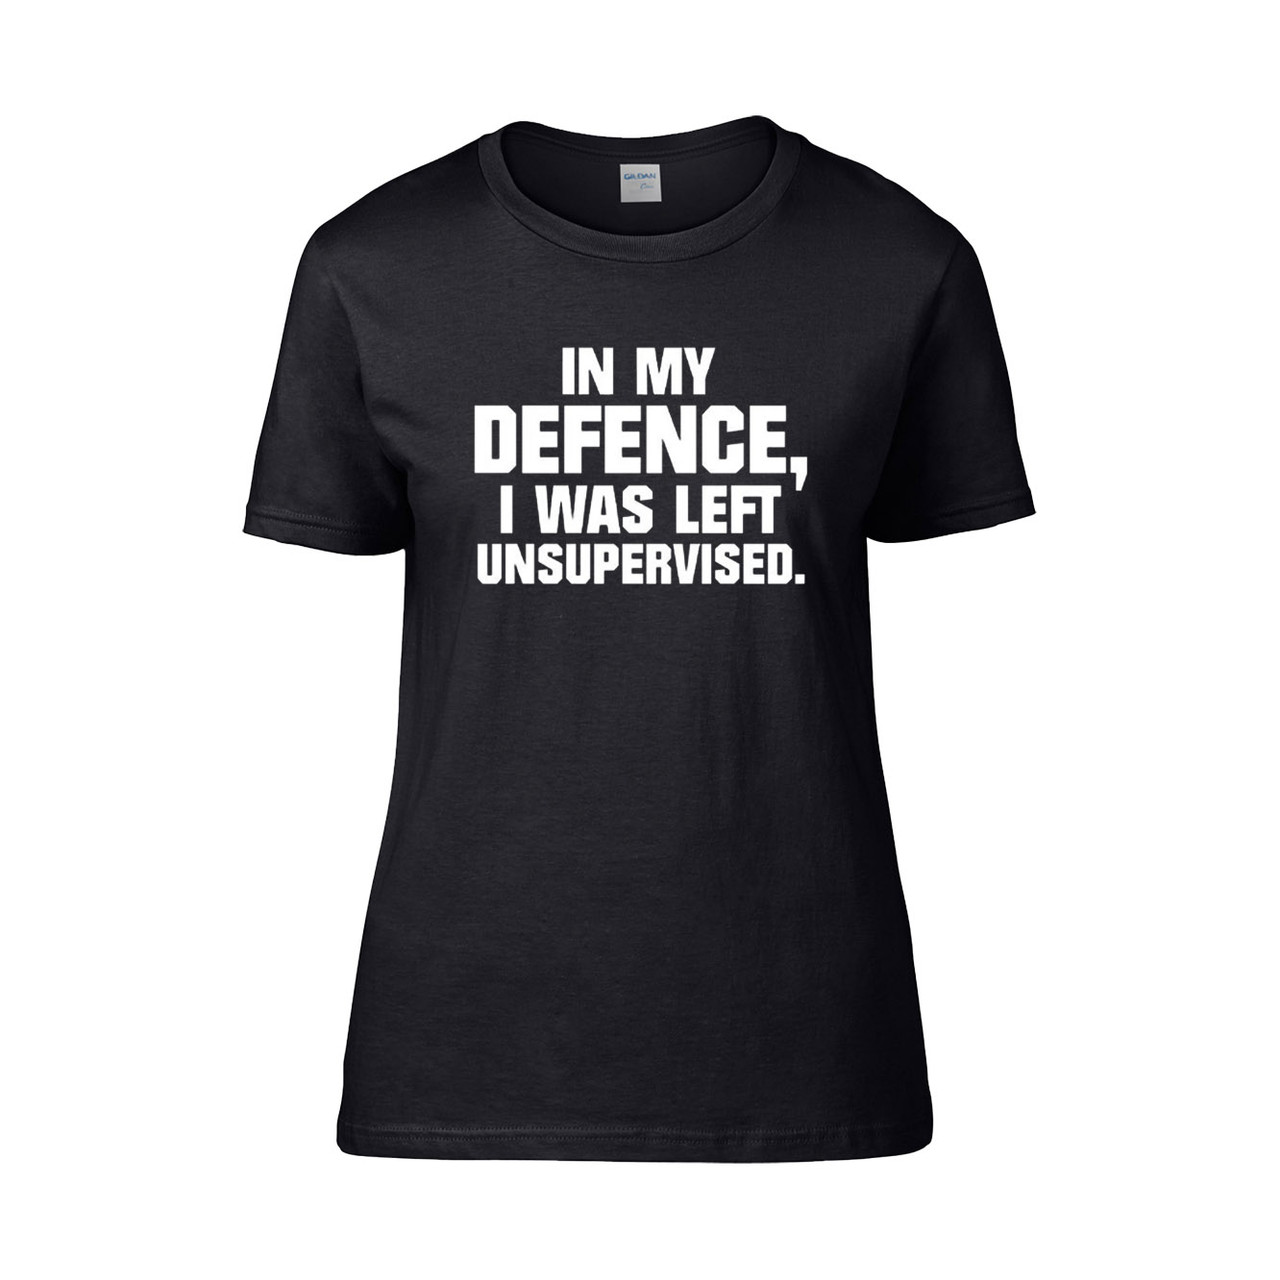 https://cdn11.bigcommerce.com/s-fbh9rcmv2i/images/stencil/1280x1280/products/711996/758582/in_my_defence_i_was_left_unsupervised_2__19241.1695796016.jpg?c=1